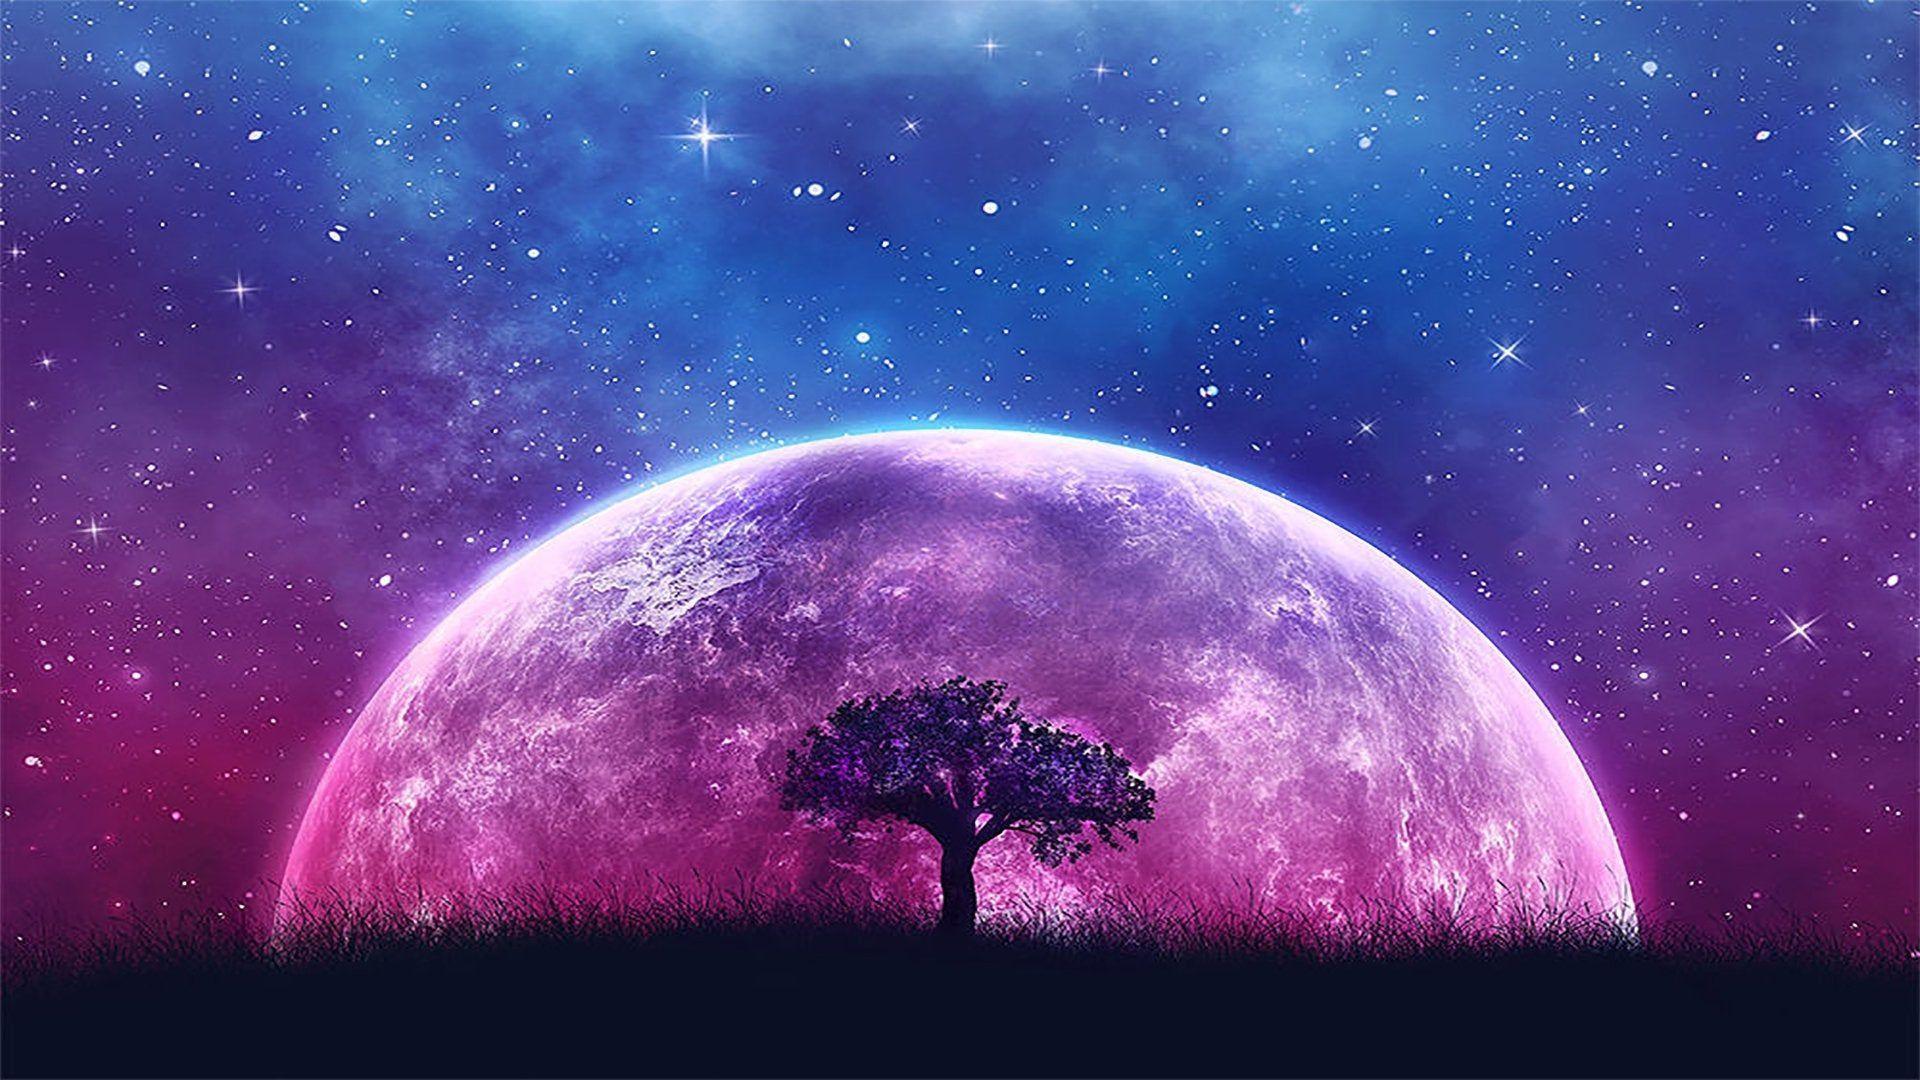 Aesthetic Galaxy Background Landscape : You can download the background